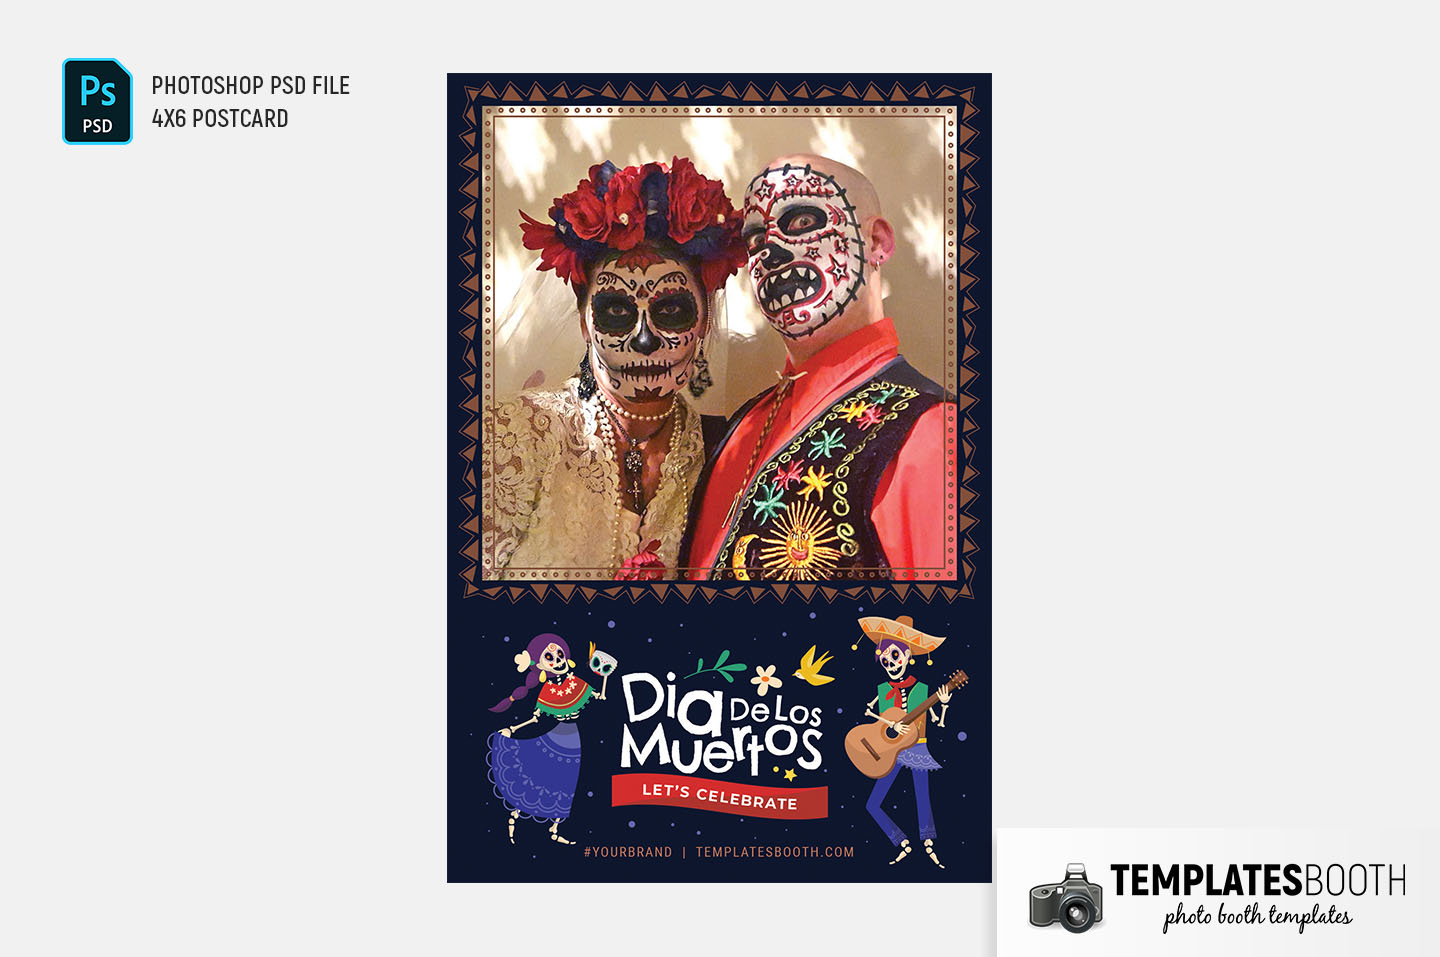 Day of The Dead Photo Booth Template (4x6 postcard)